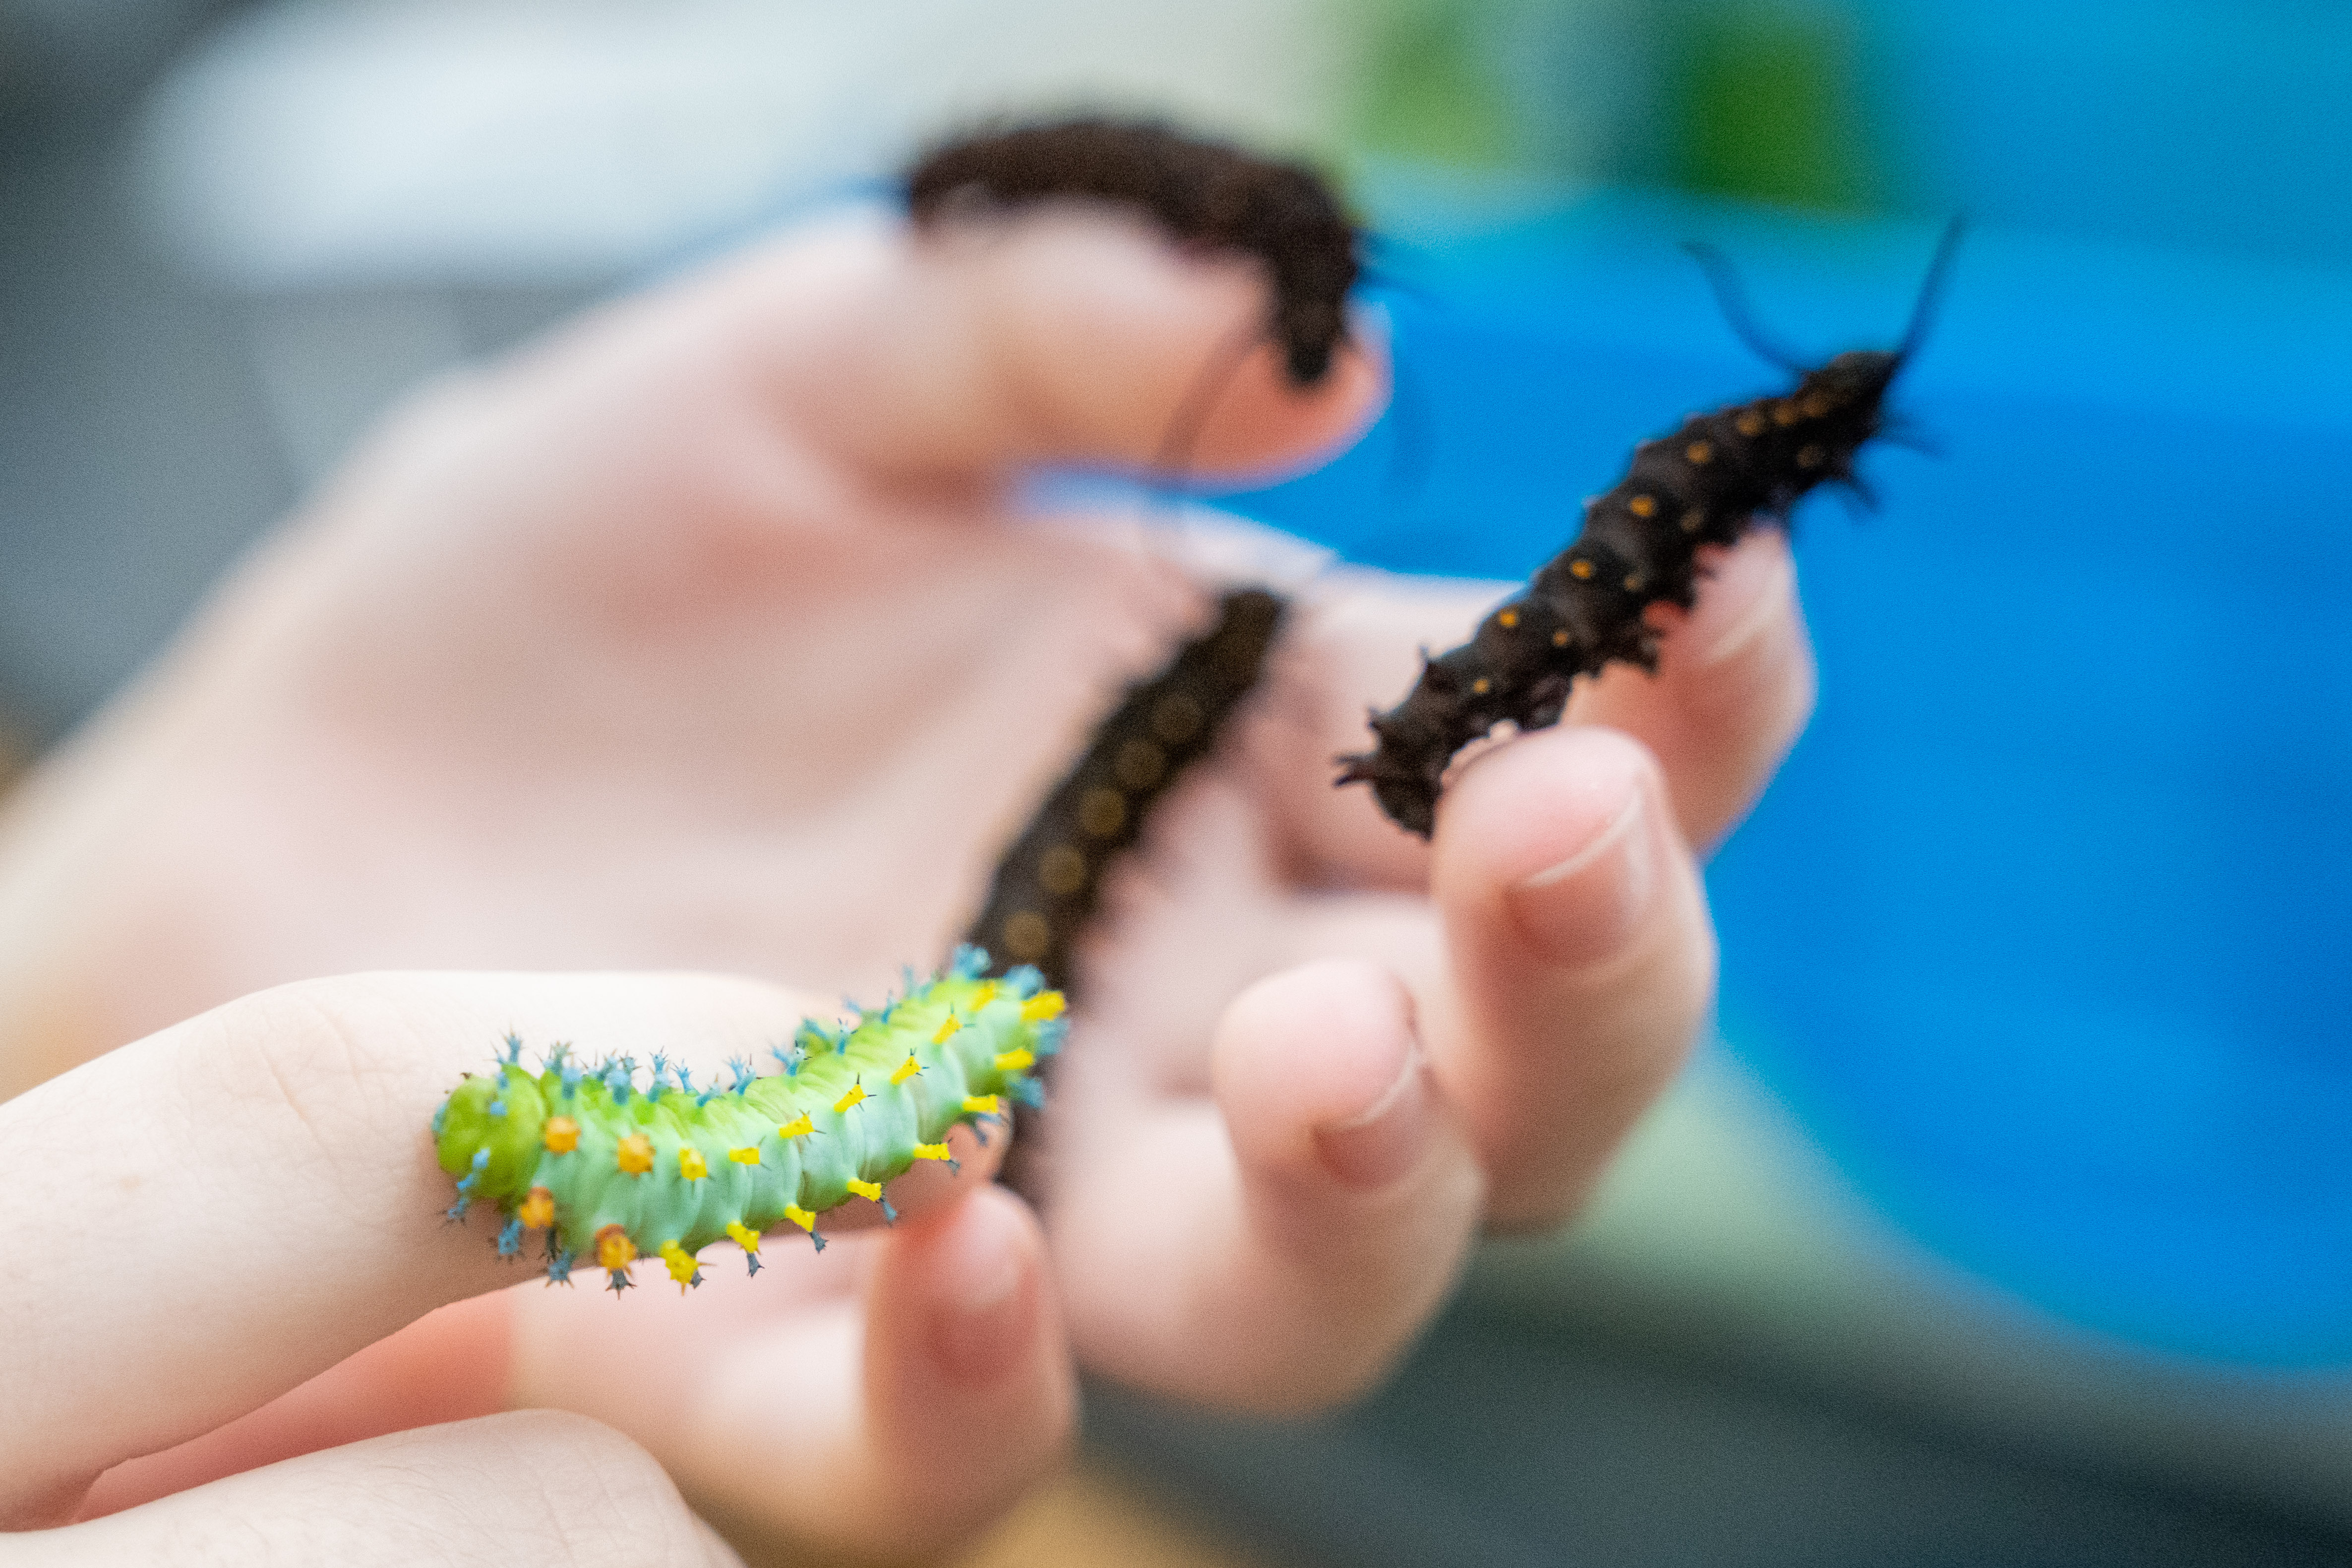 Catepillars crawl on campers' fingers